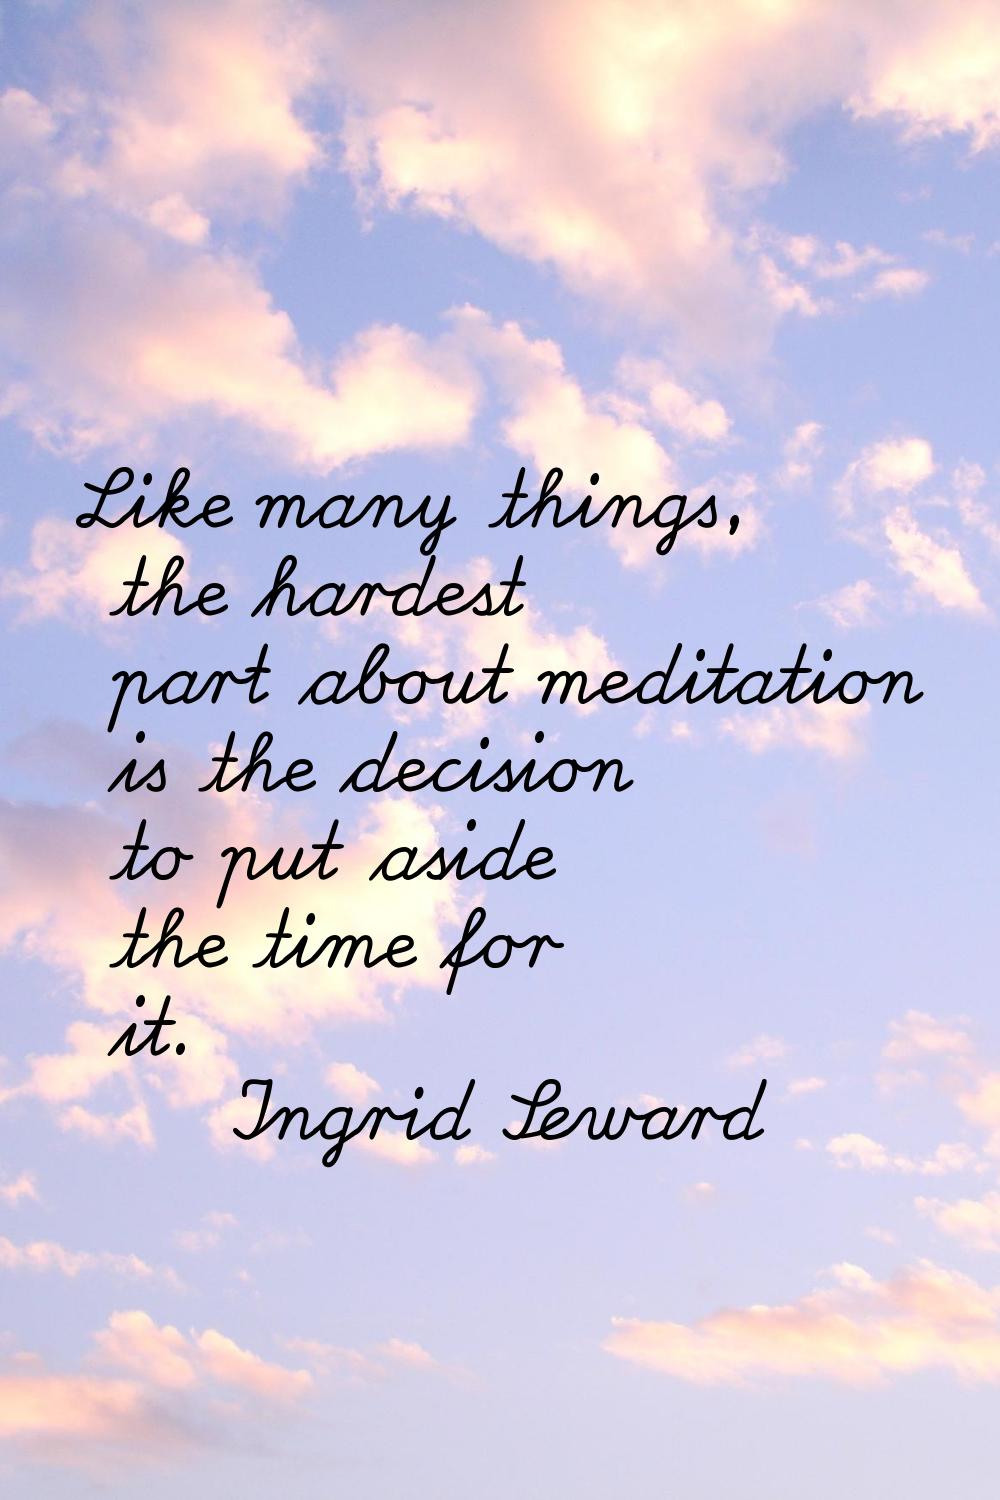 Like many things, the hardest part about meditation is the decision to put aside the time for it.